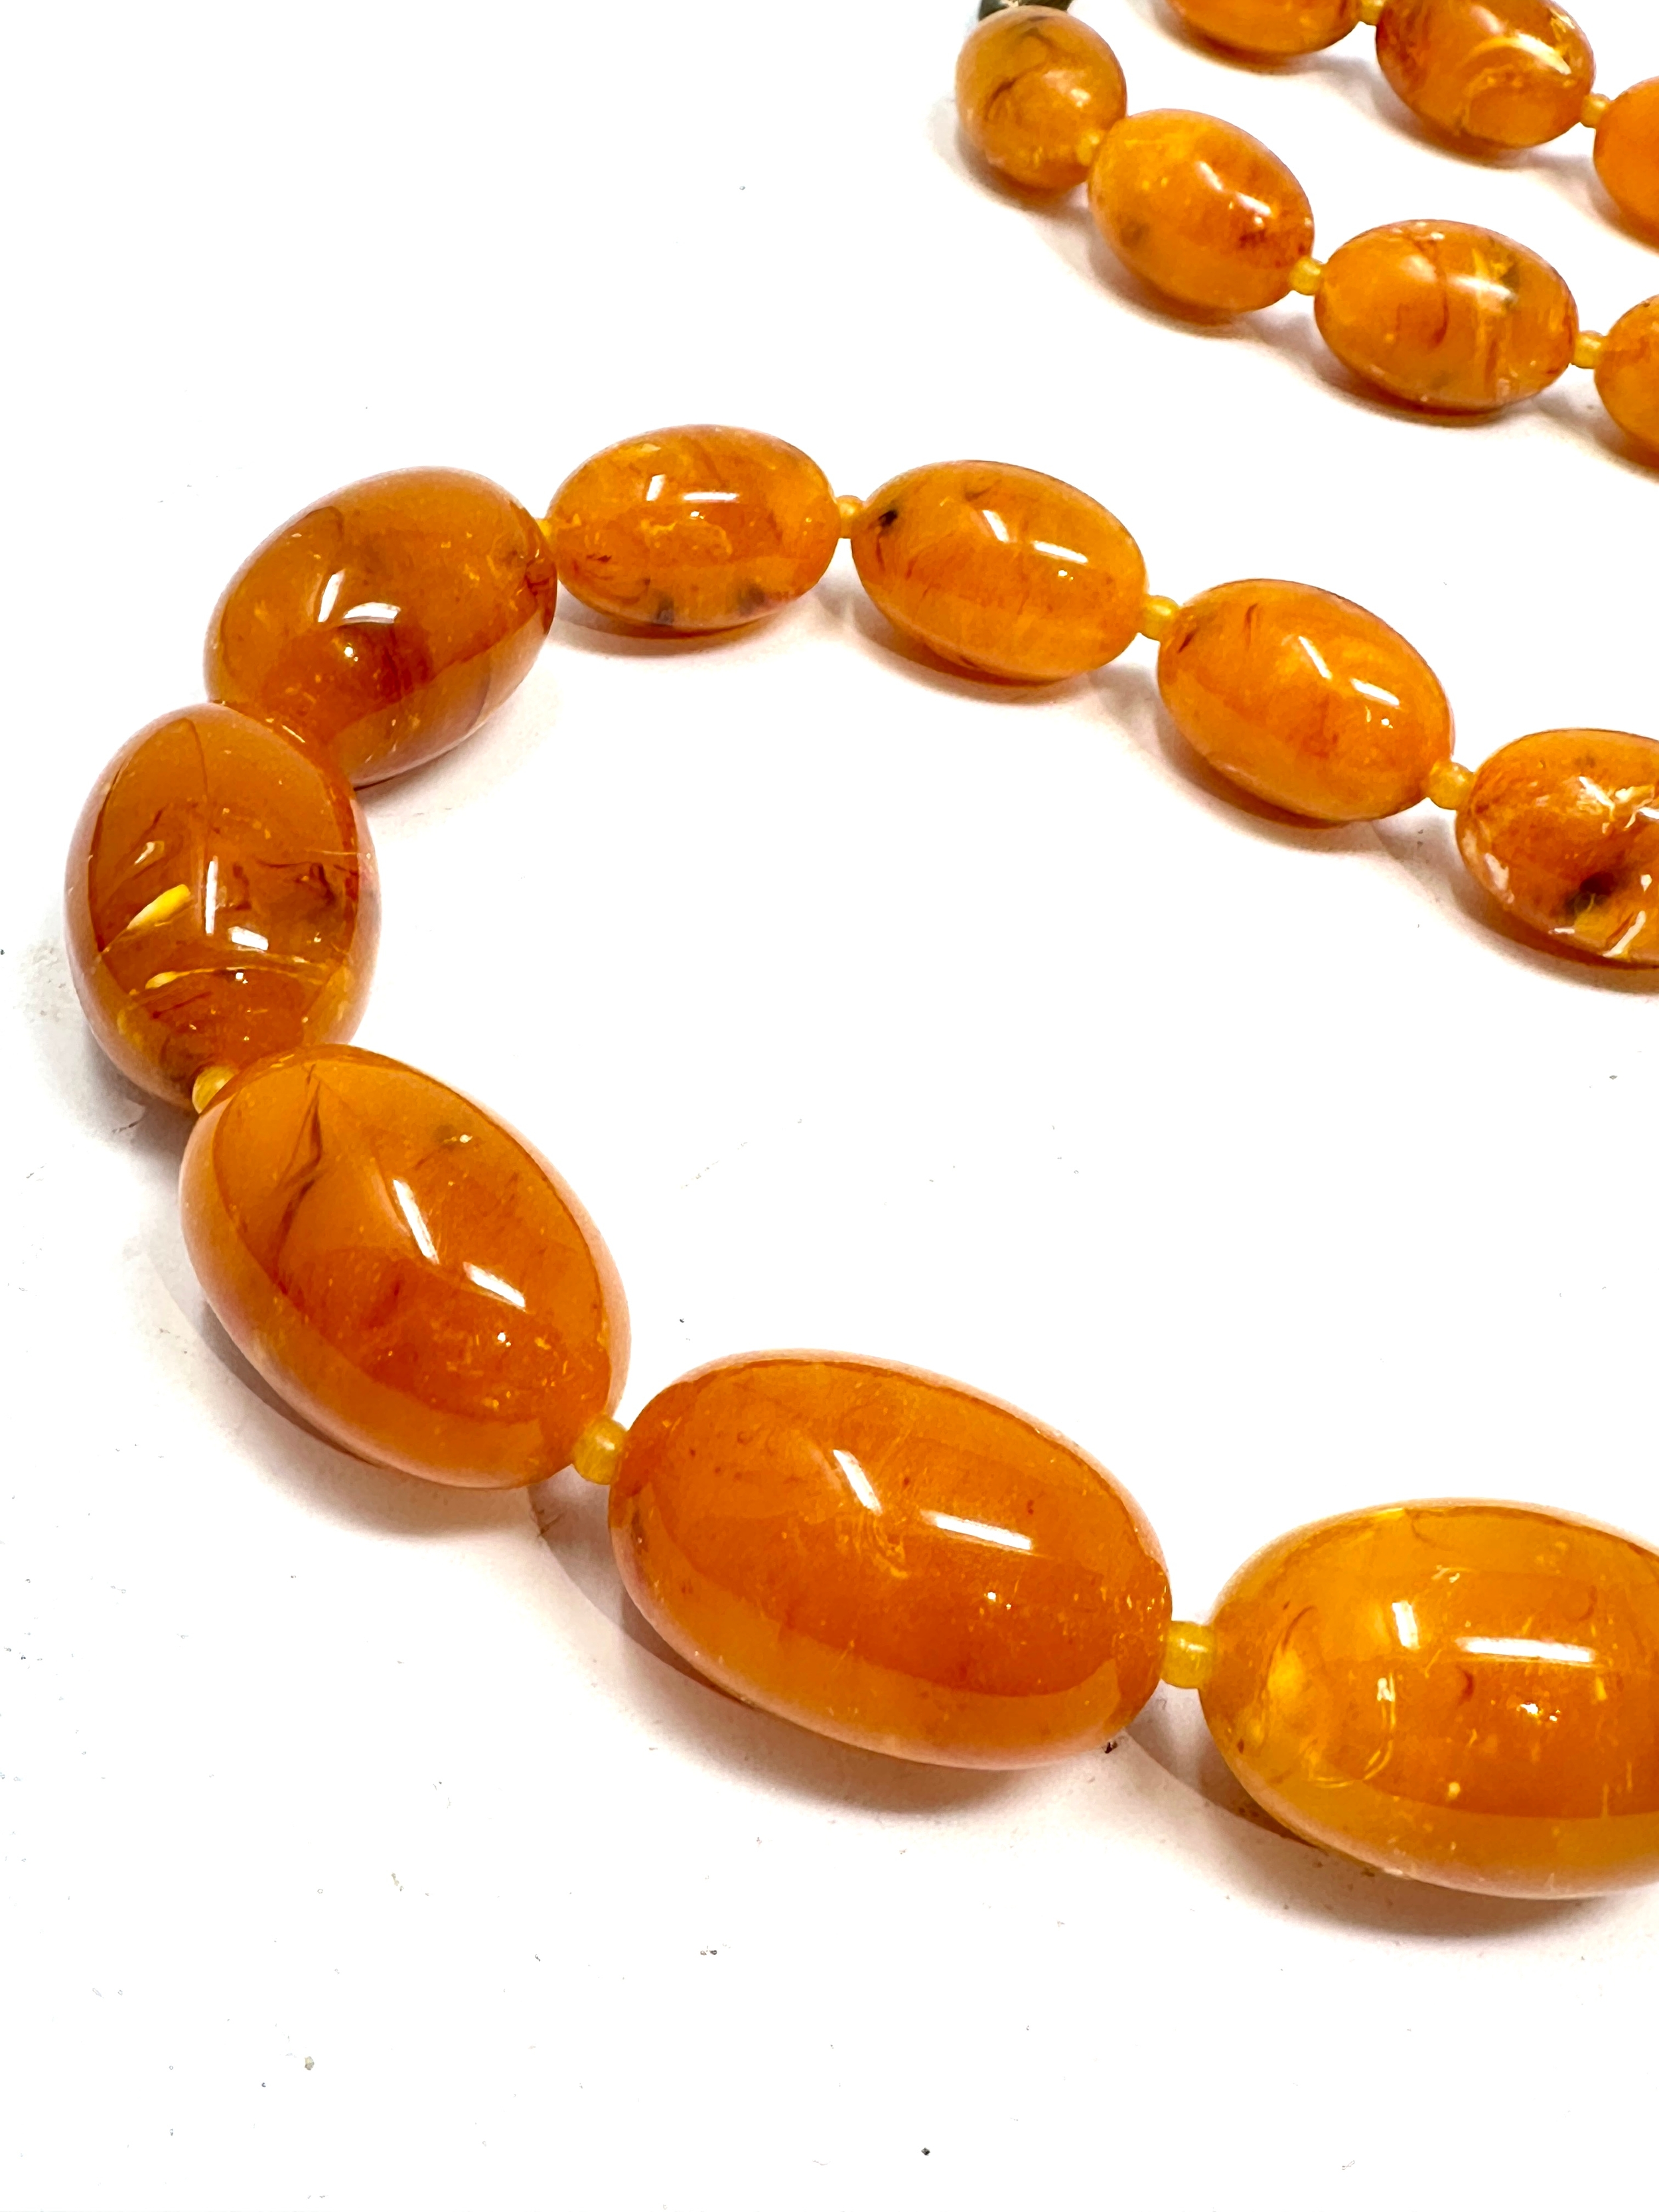 costume amber type bead necklace weight 153g - Image 2 of 3